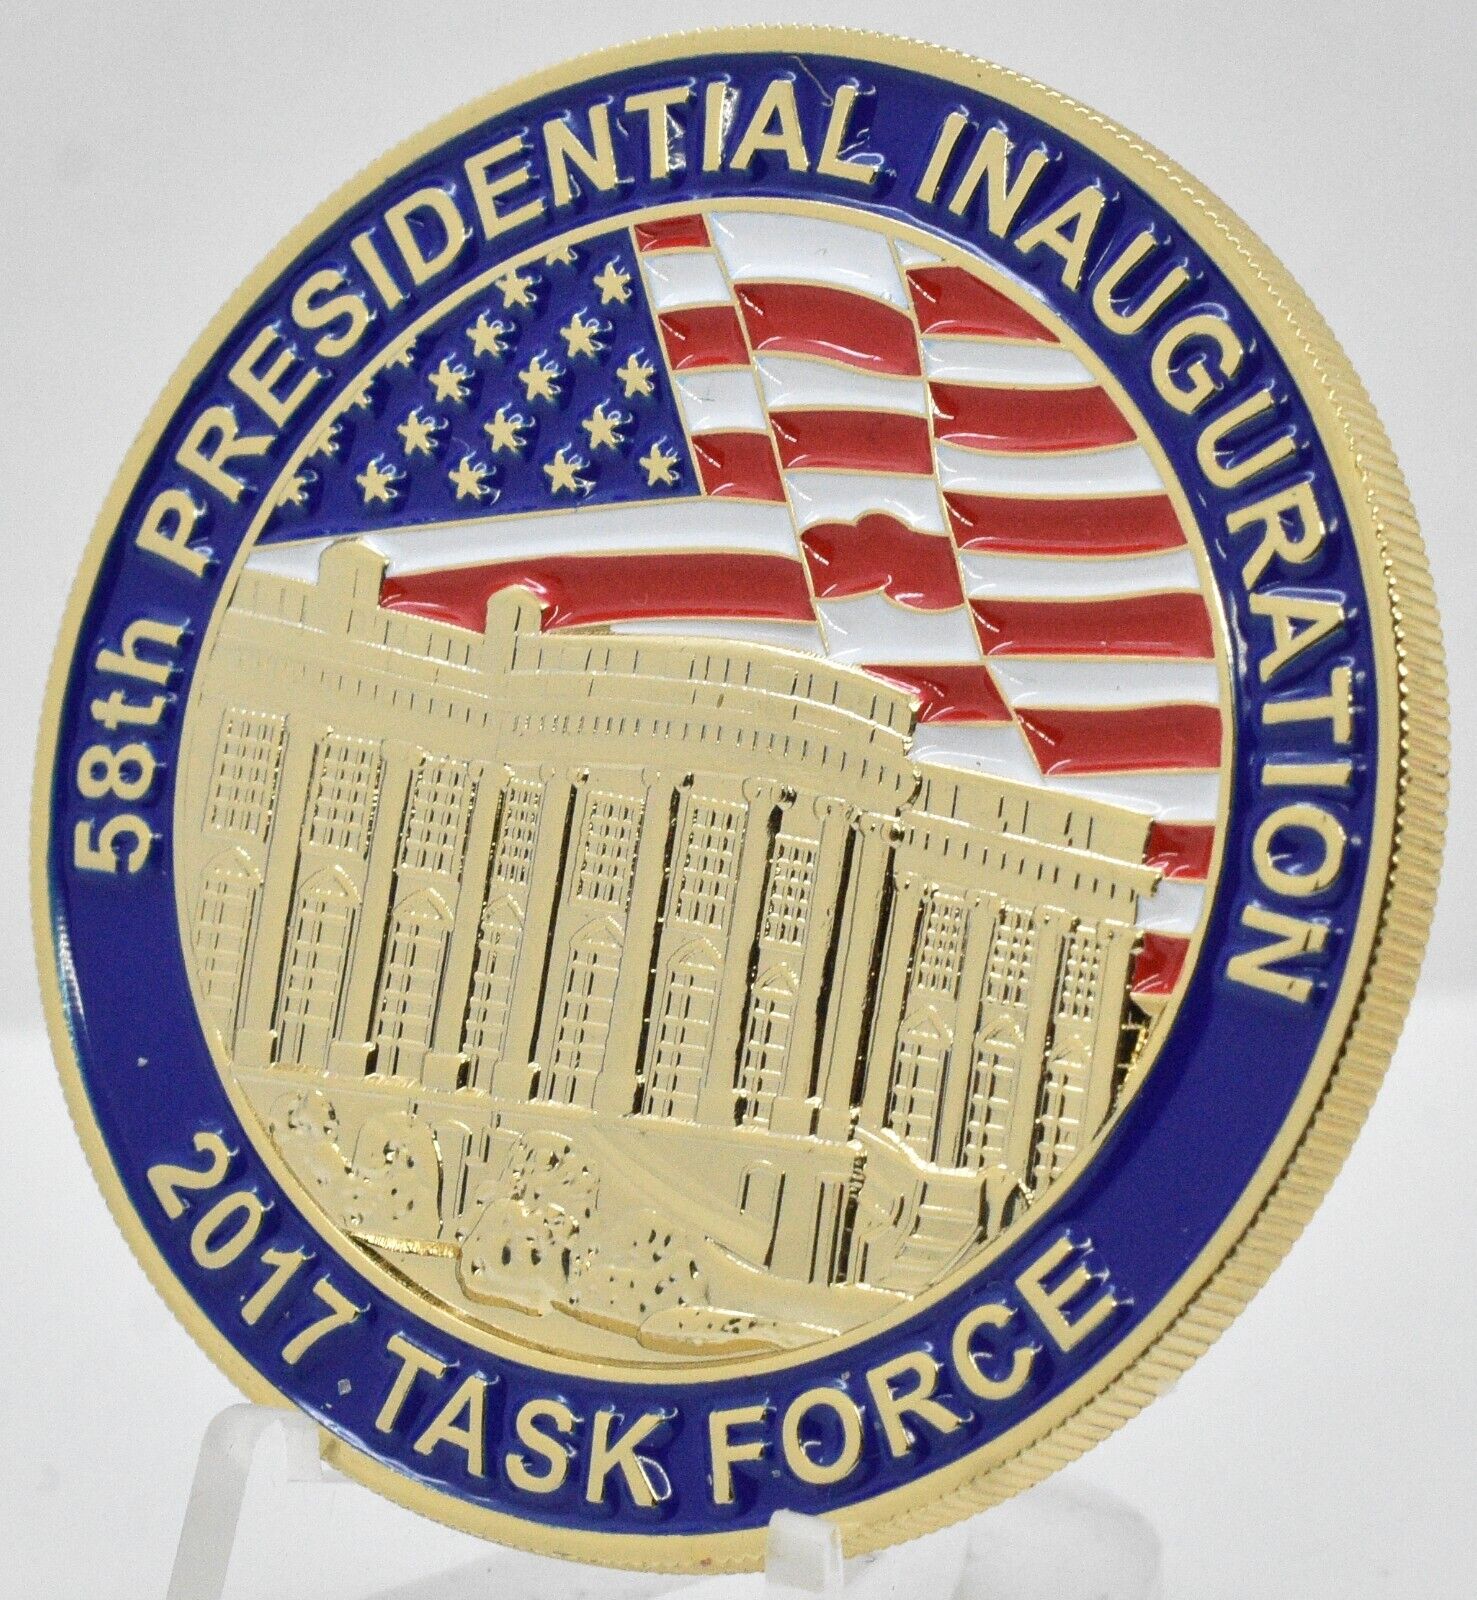 President Donald Trump 2017 Inauguration Miami Police Task Force Challence Coin